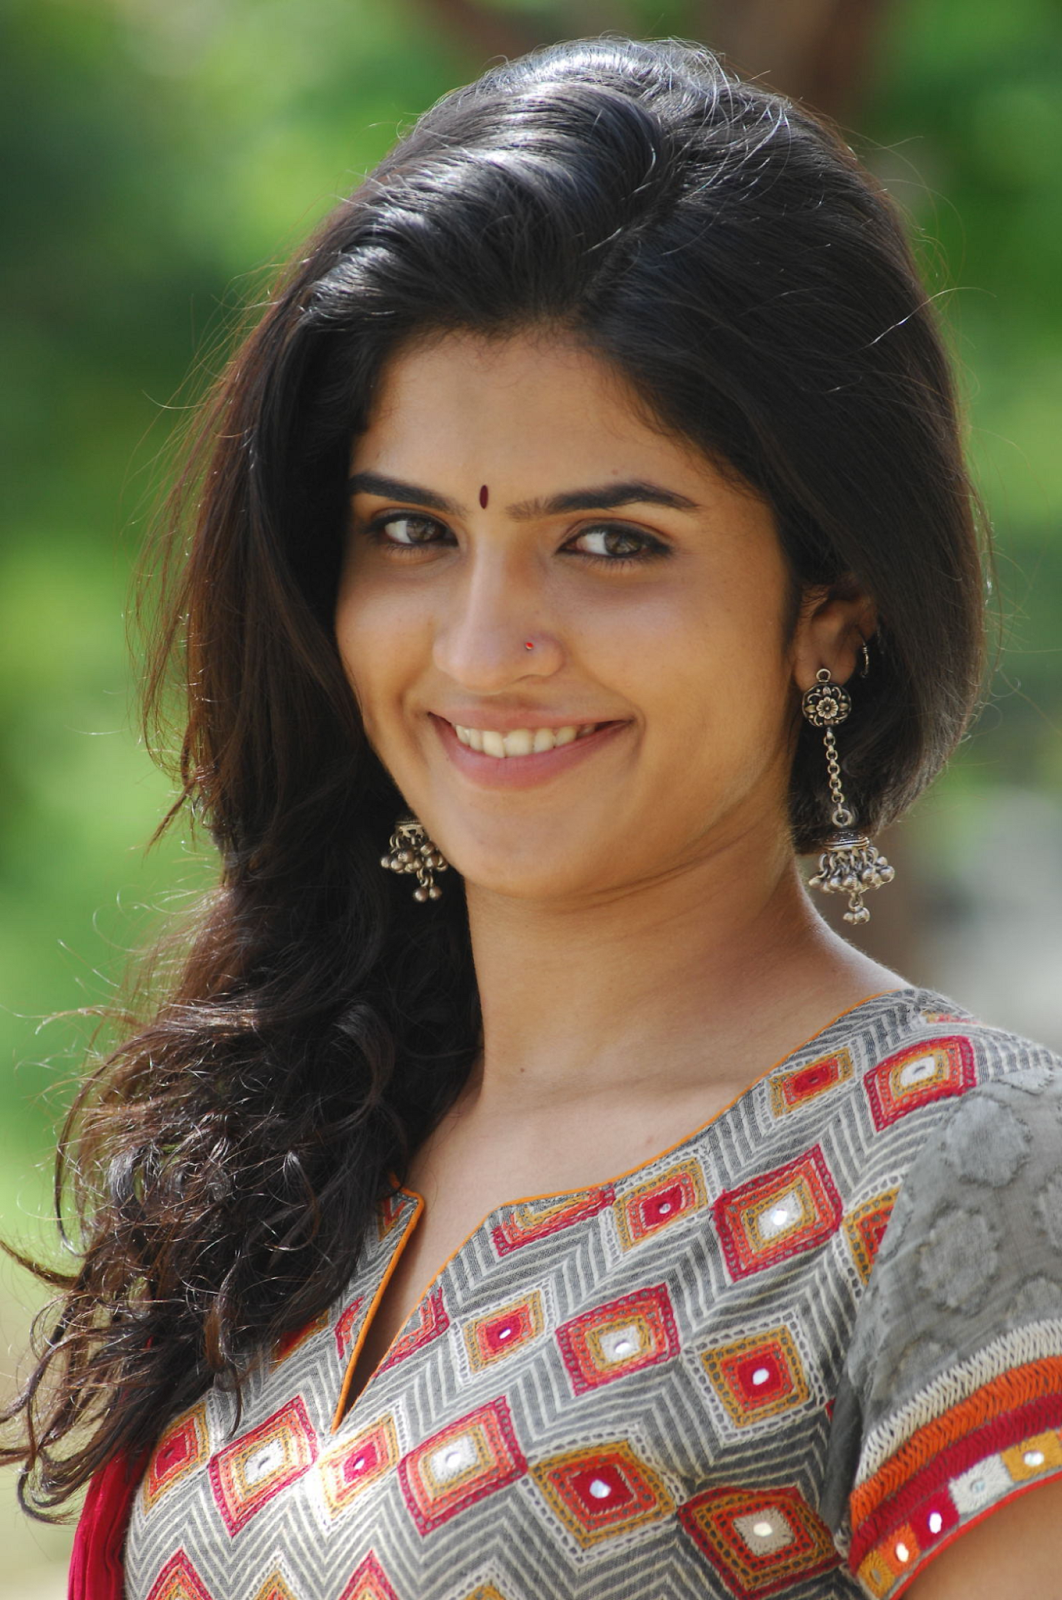 South Indian Actress Hd Images Download - Actress Indian South Hd Px ...